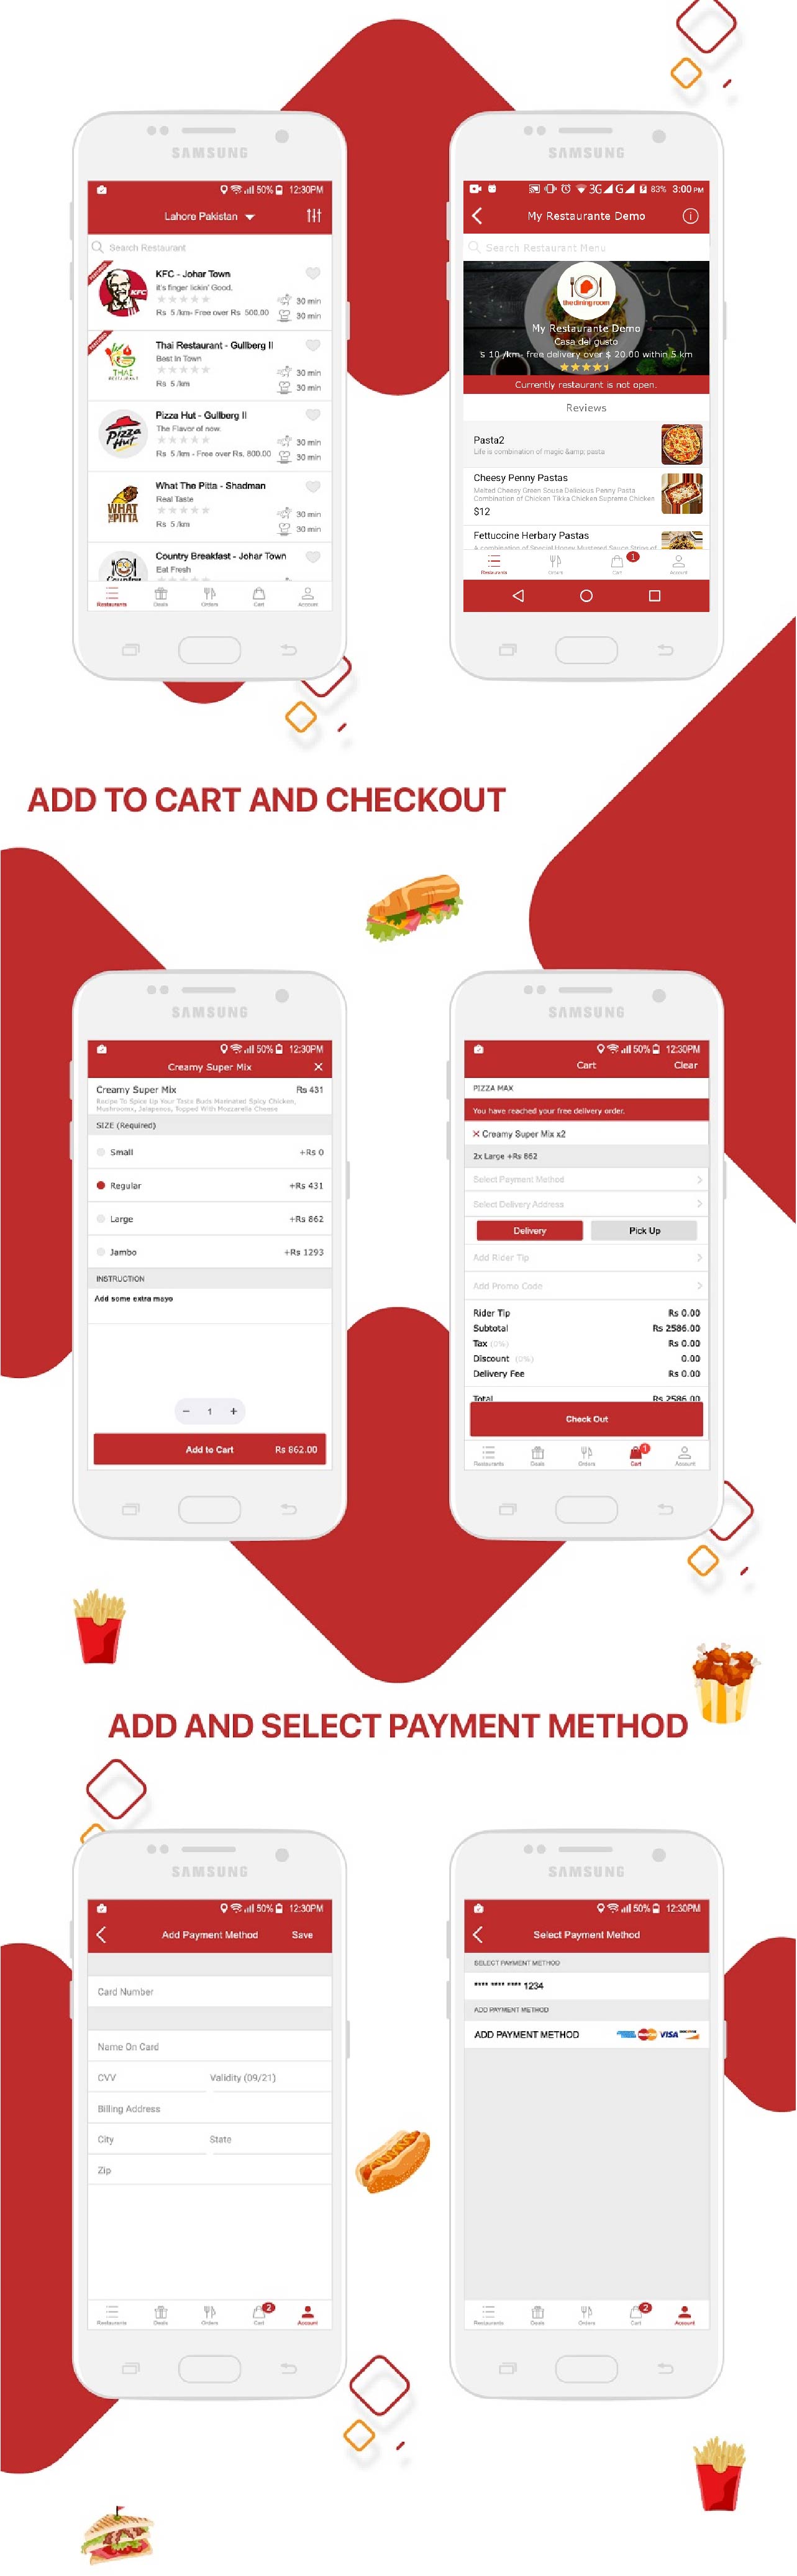 Native Restaurant Food Delivery & Ordering System With Delivery Boy - Android v2.0.9 - 14